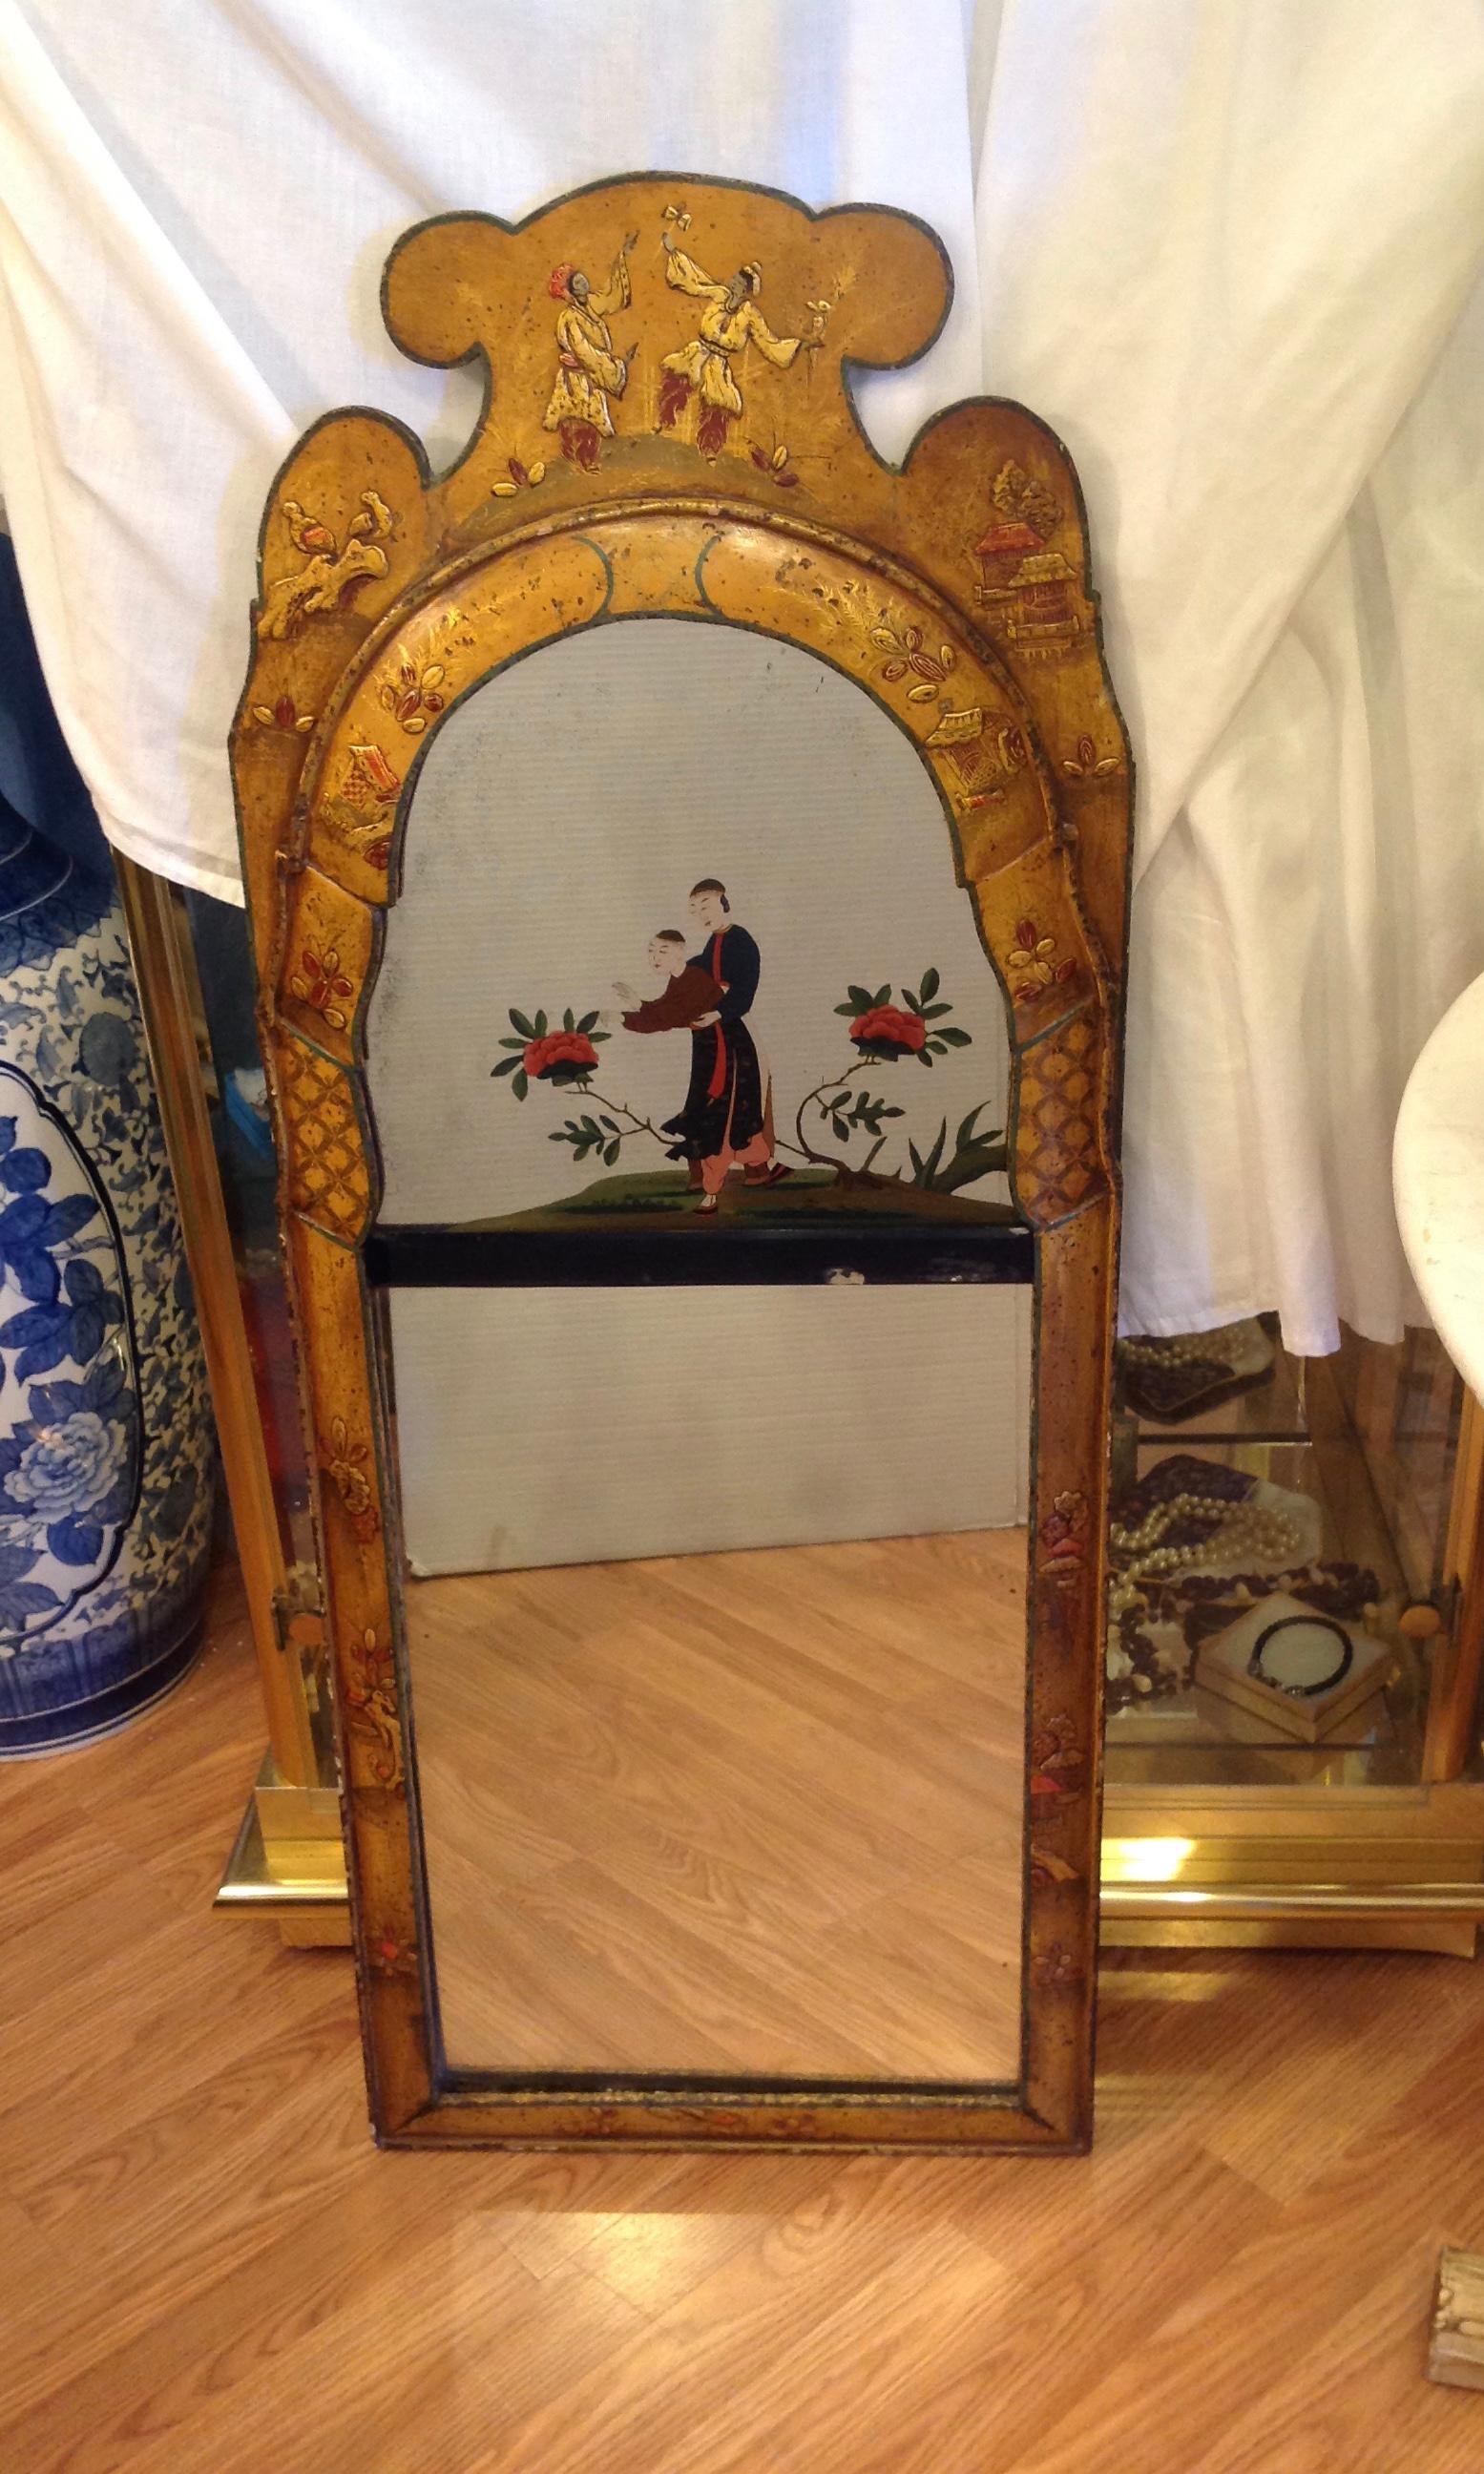 Exquisite detail and quality. Unusual color with an abundance of figures and a 2 part
mirror design. The upper mirror is fashioned with an outstanding reverse painting.
The lower mirror is bevelled.